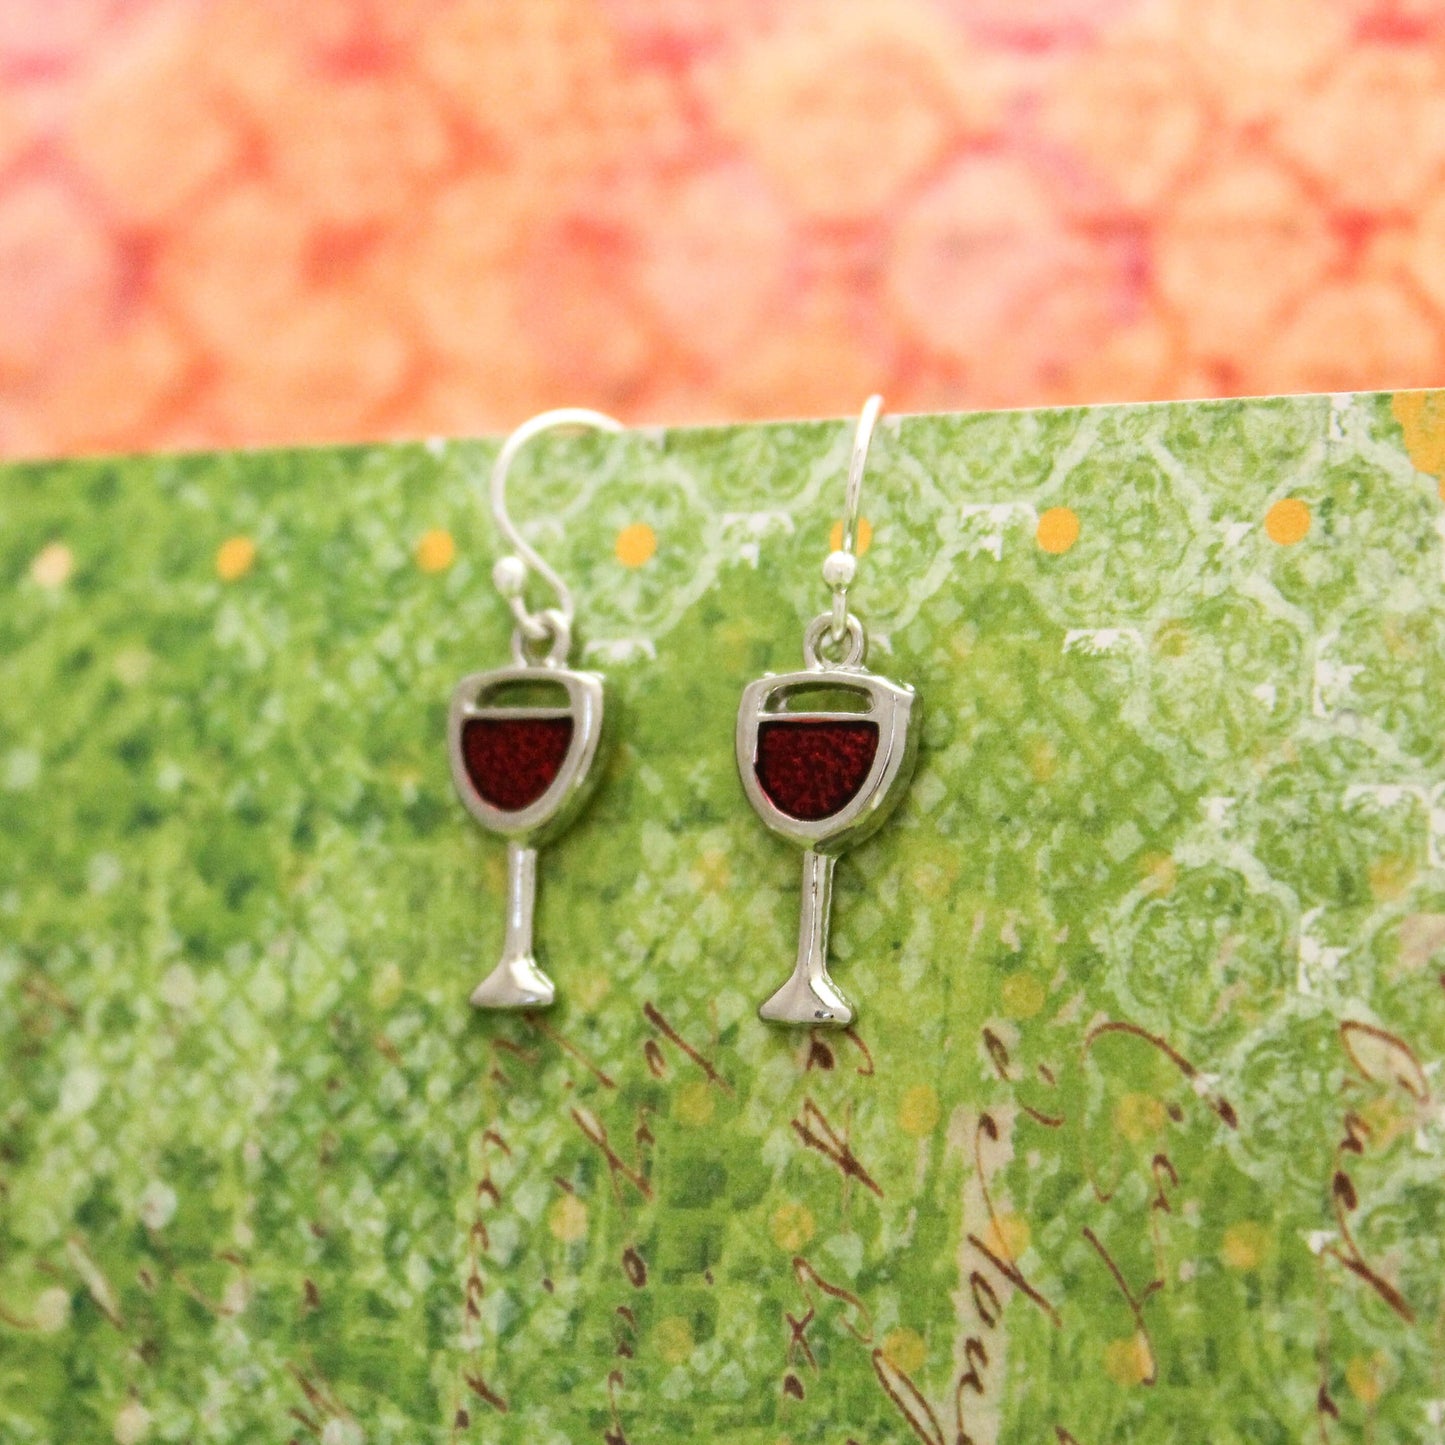 Cute Red Wine Earrings, Silver Wine Glass Earrings, Wine Lover Jewelry, Red Wine Earrings, Silver Festive Holiday Wine Jewelry, Gift for Her